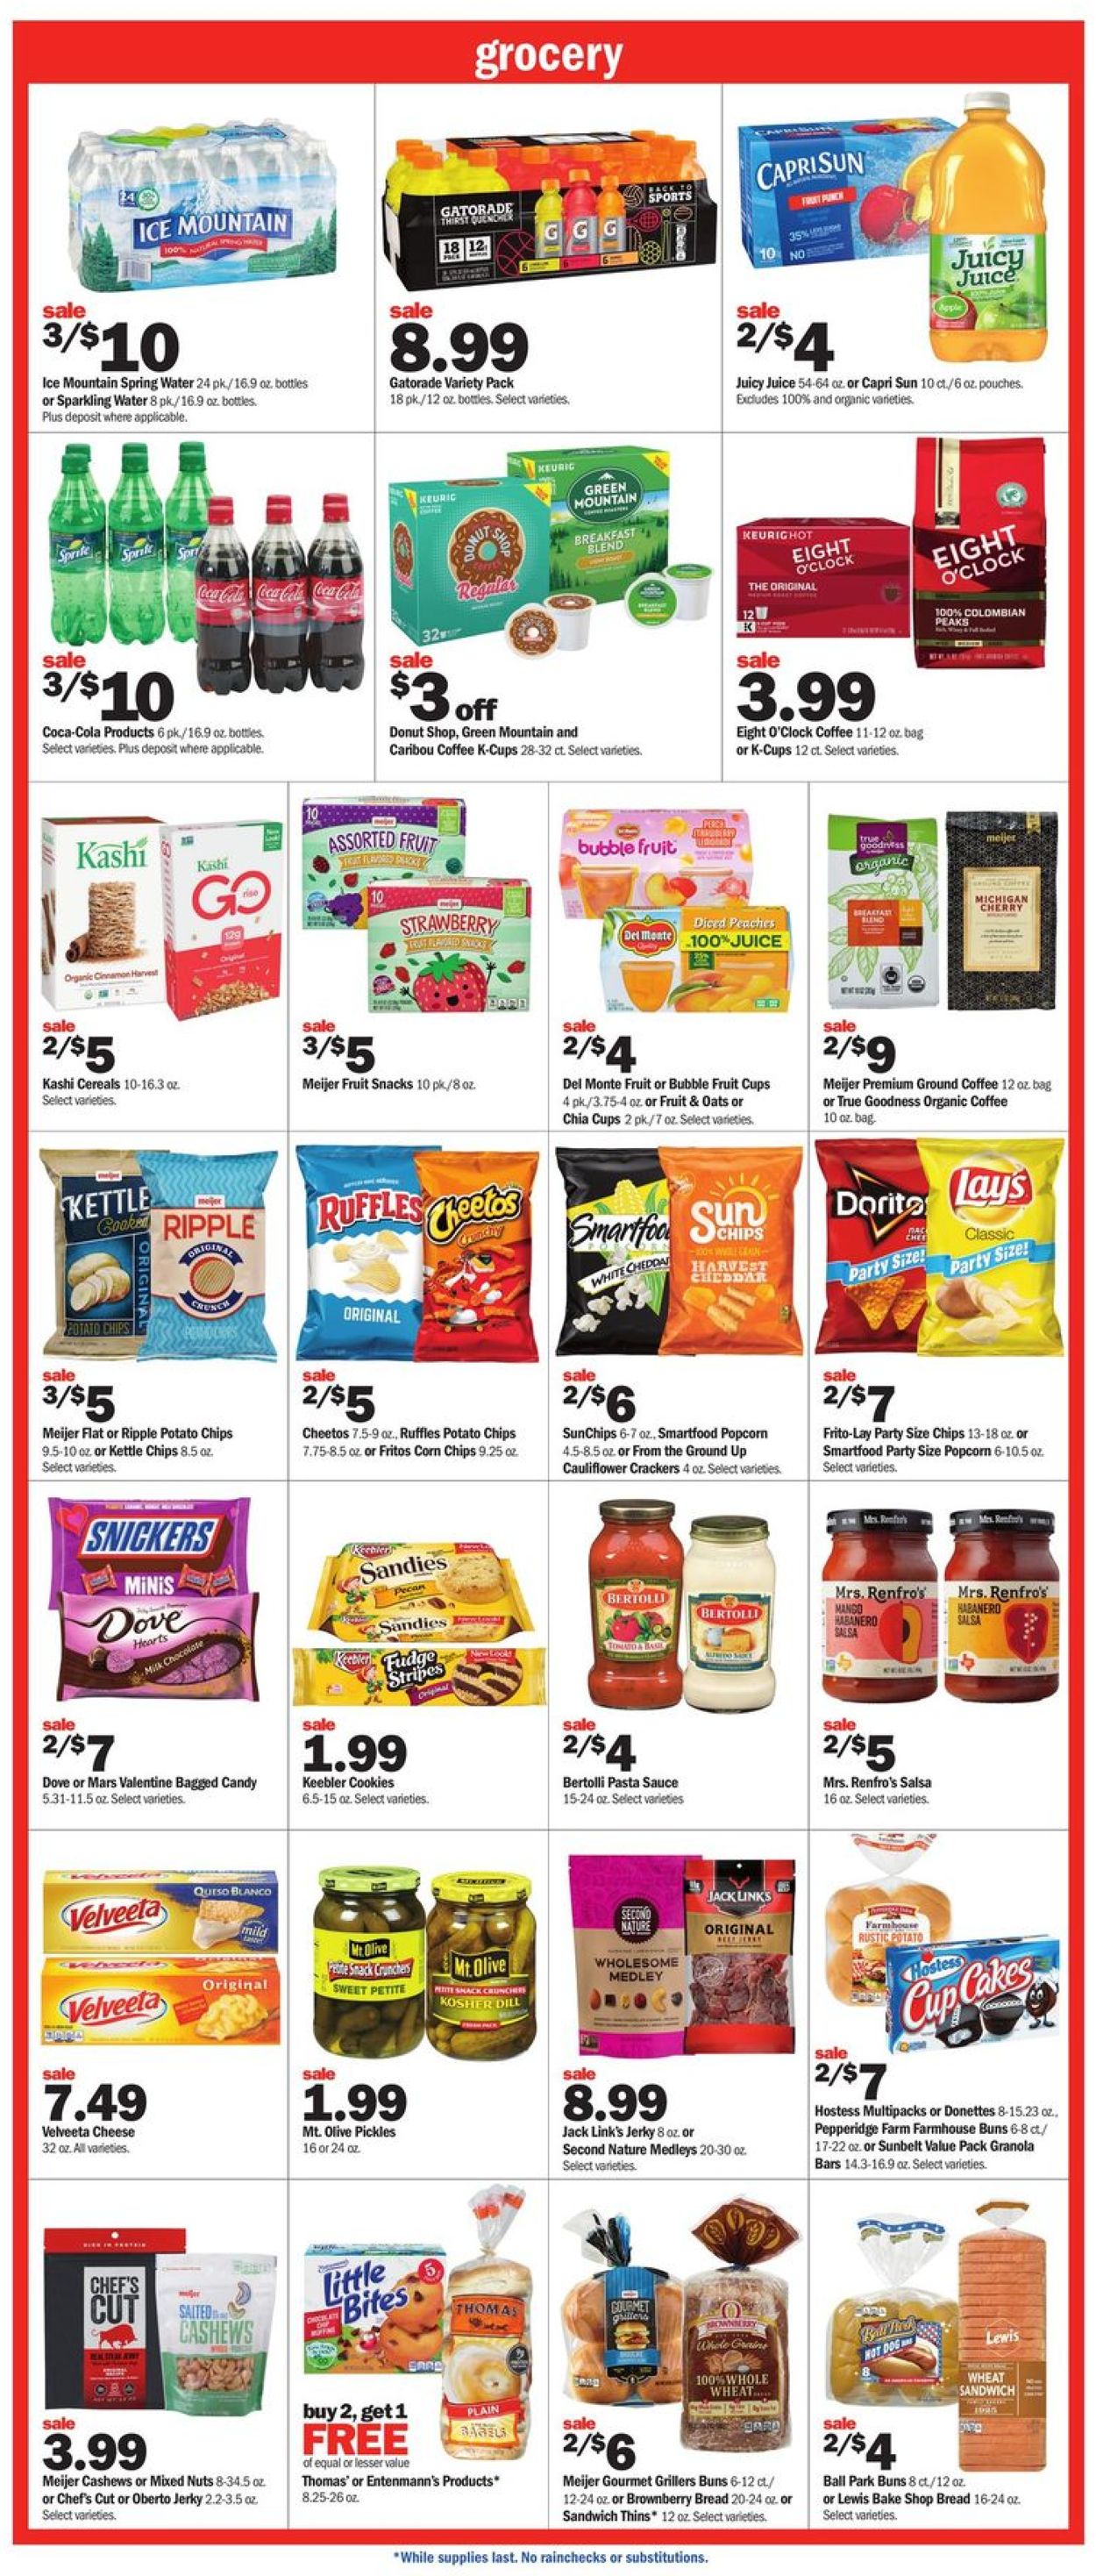 Meijer Current weekly ad 01/12 - 01/18/2020 7 - frequent ...